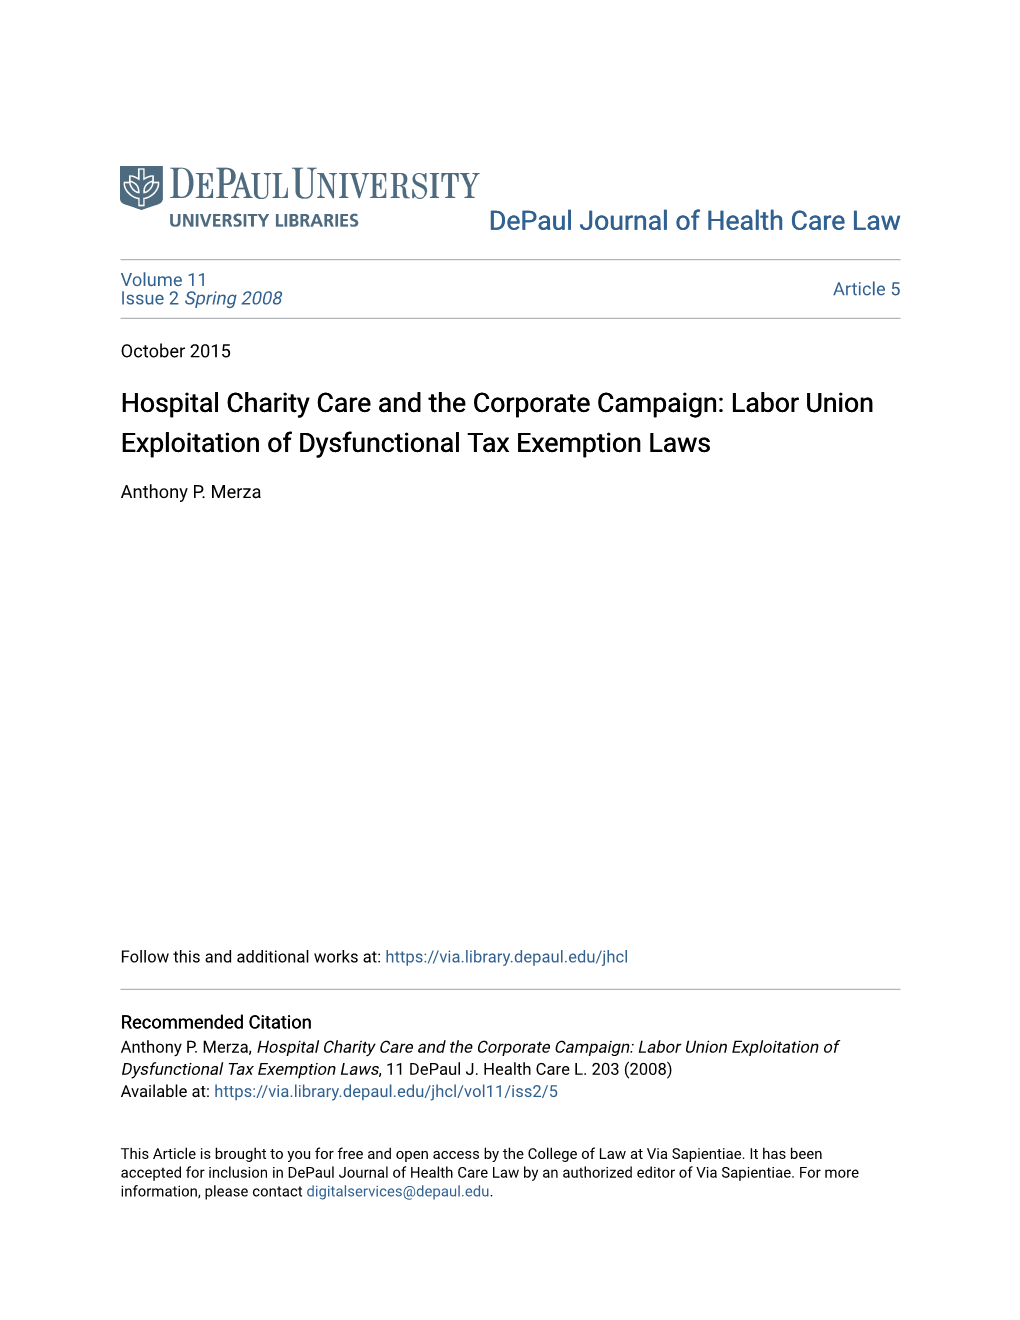 Hospital Charity Care and the Corporate Campaign: Labor Union Exploitation of Dysfunctional Tax Exemption Laws